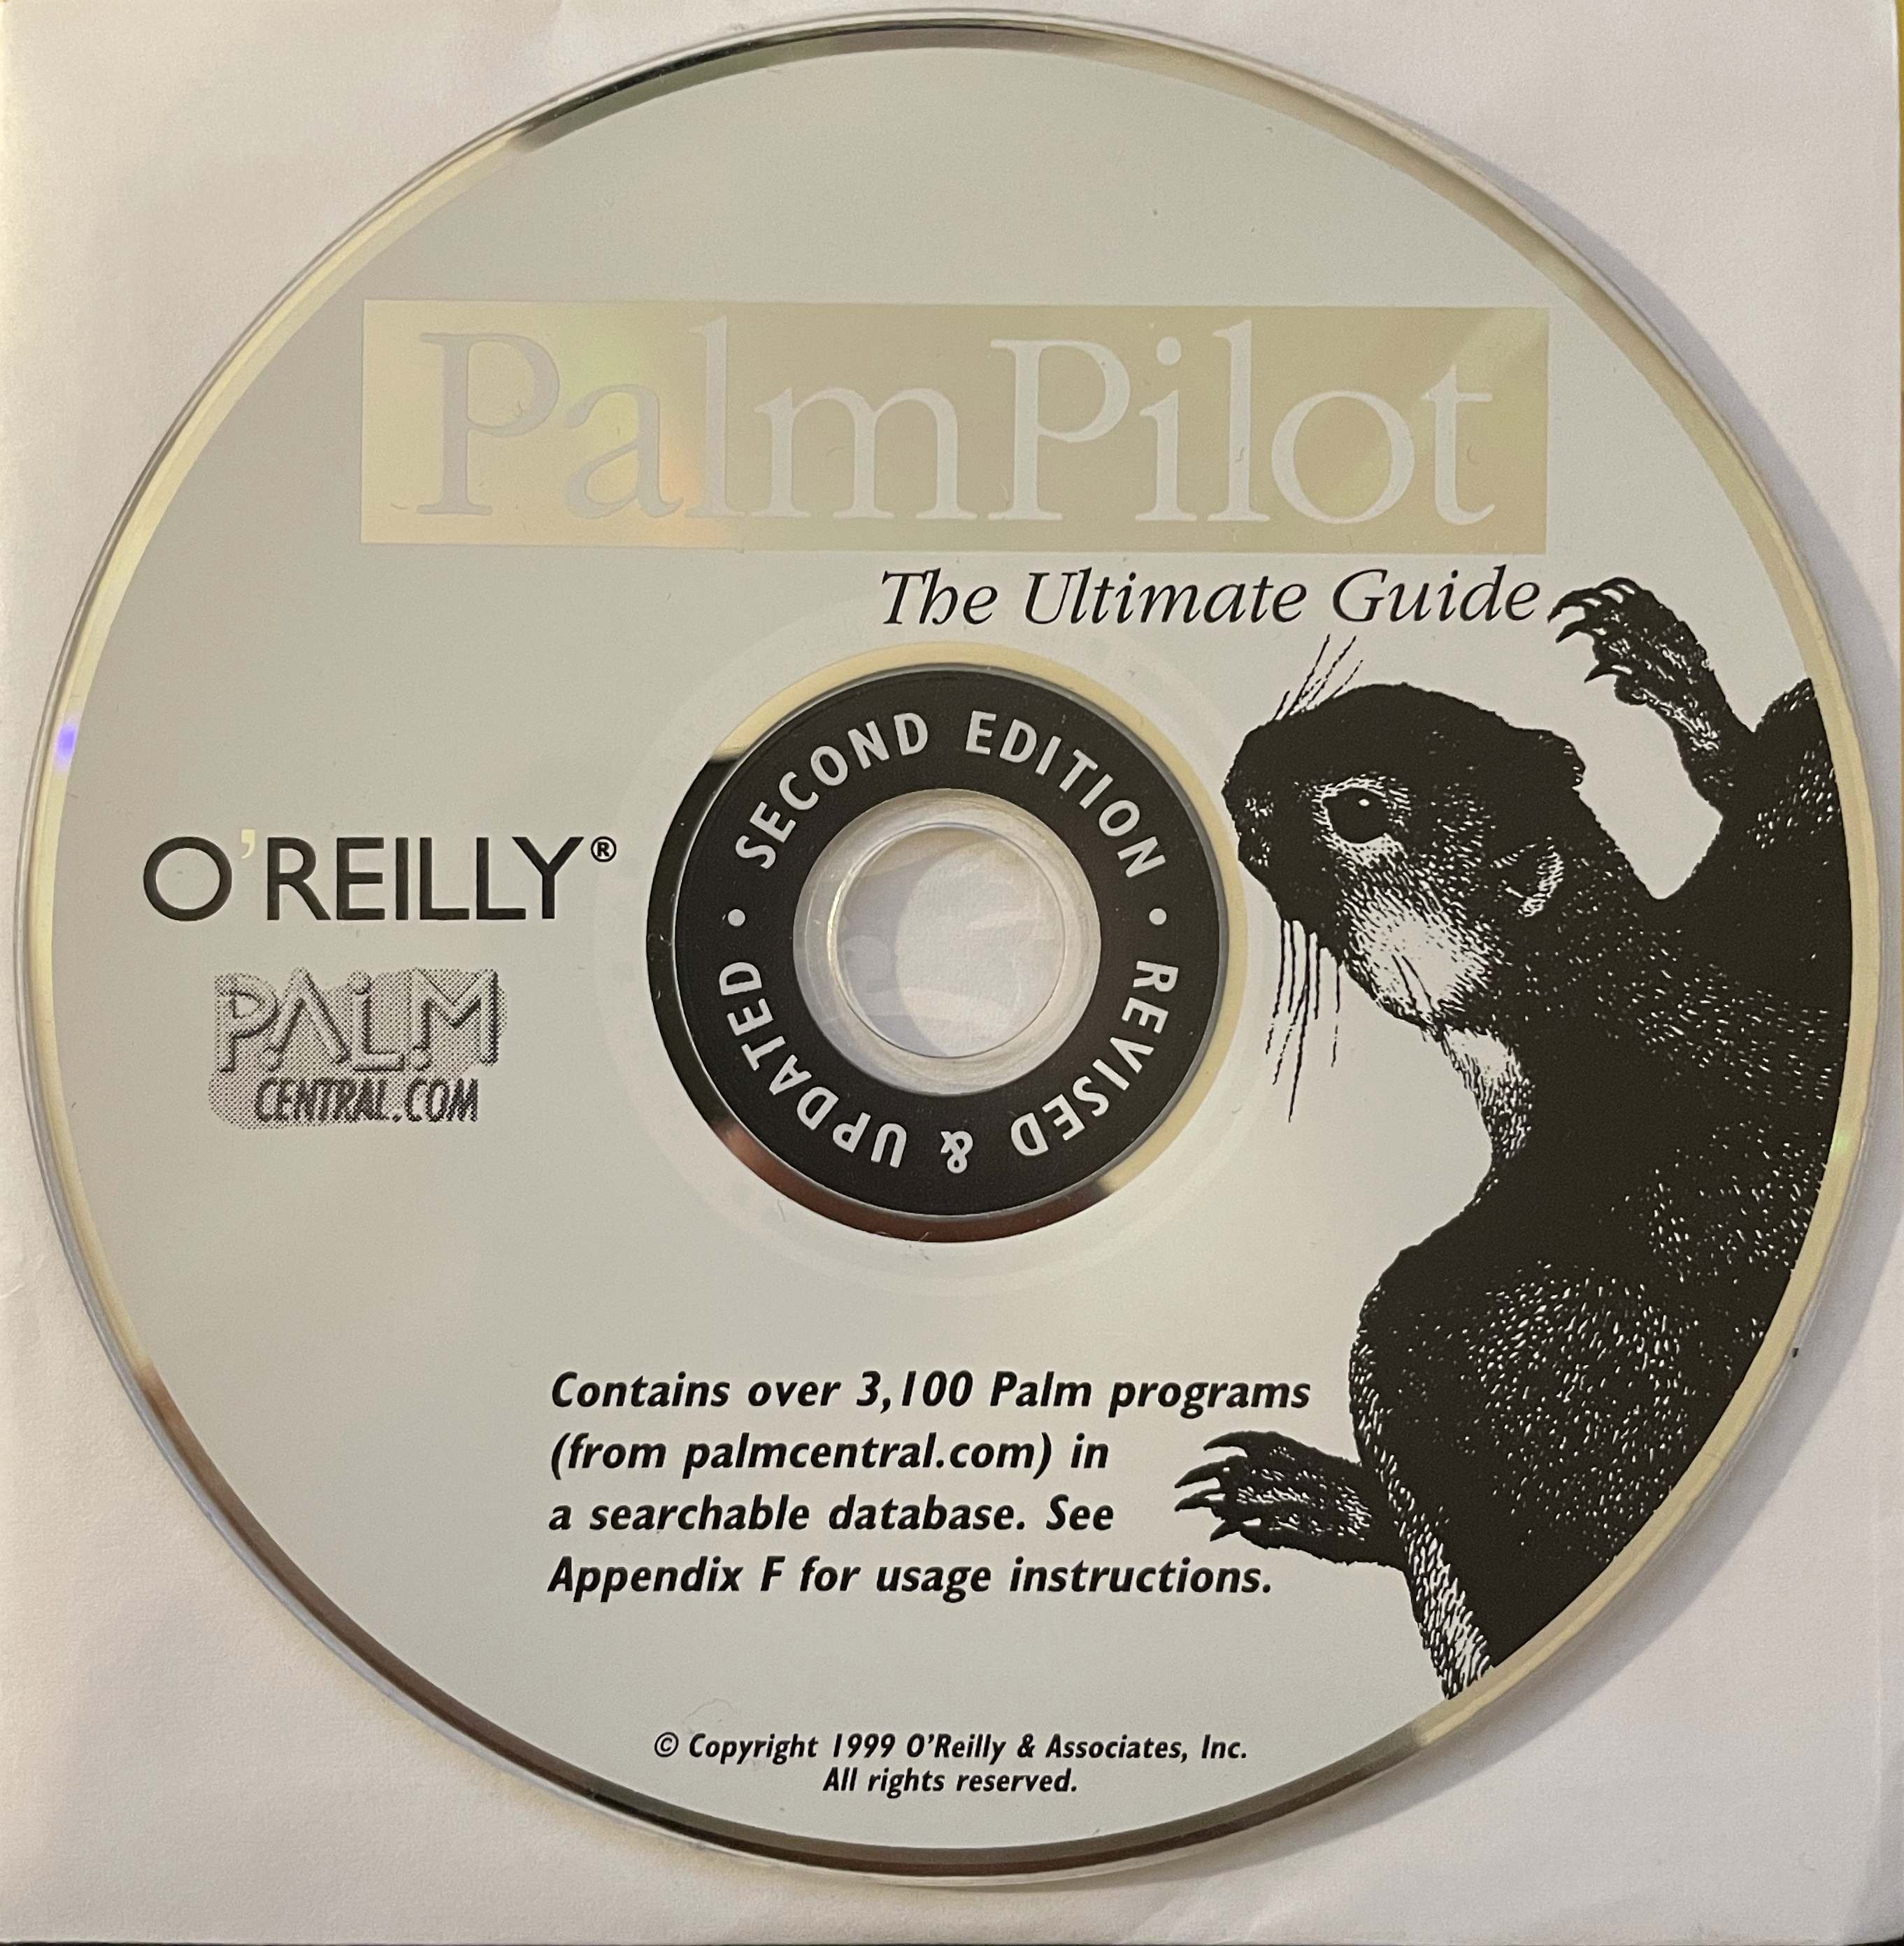 O'Reilly PalmPilot: The Ultimate Guide CD